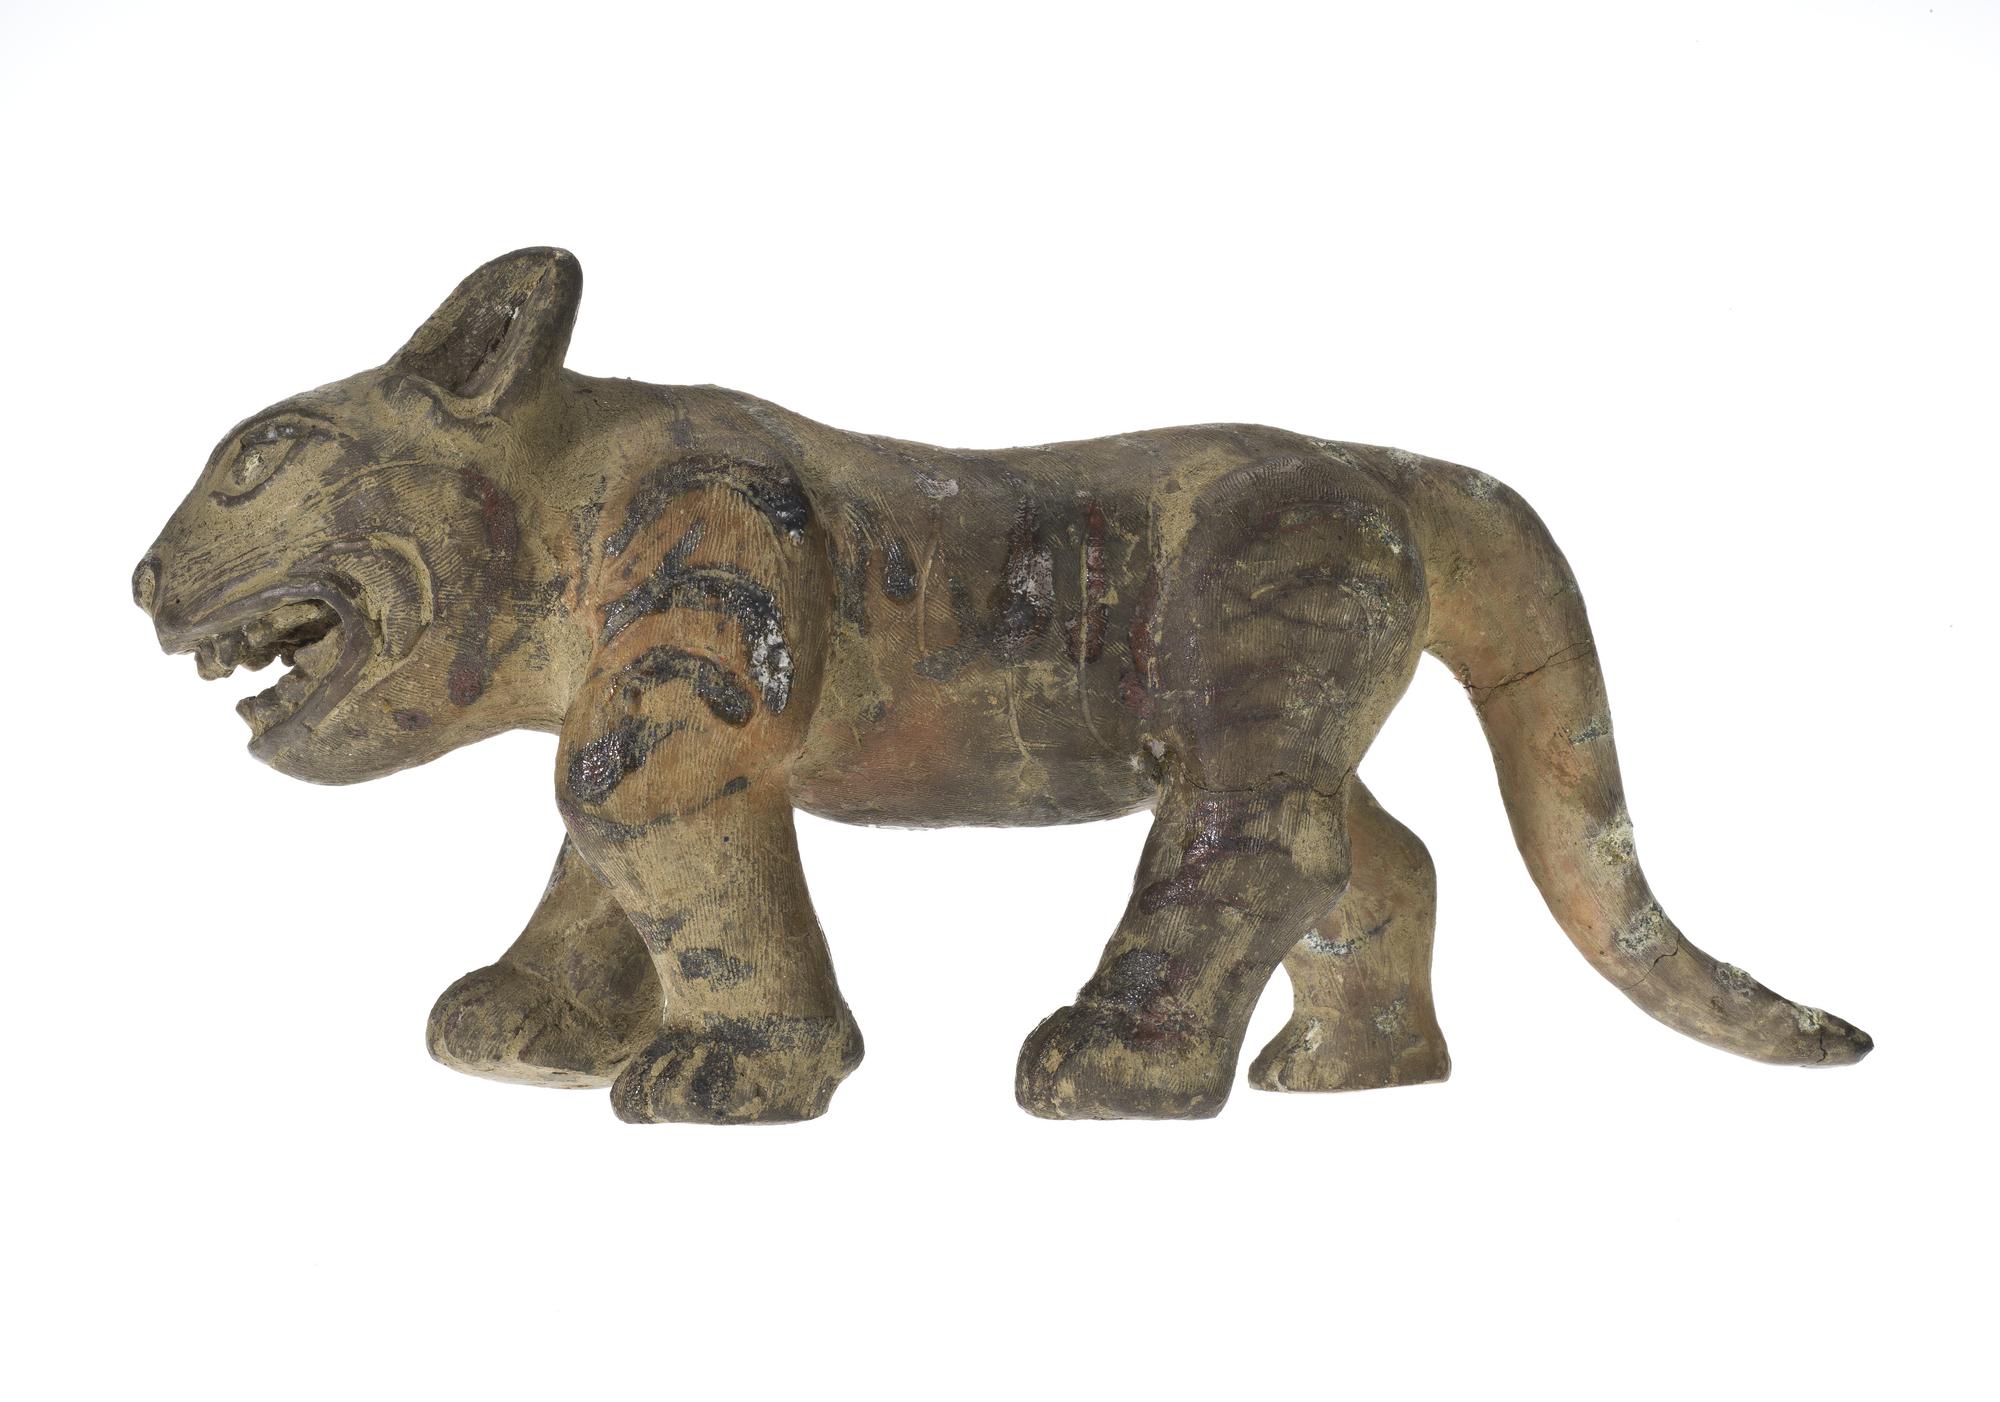 Figure of a tiger in hard reddish pottery, decorated with combed surface markings and red and green glazes: China, Liang dynasty, 502-556 AD.